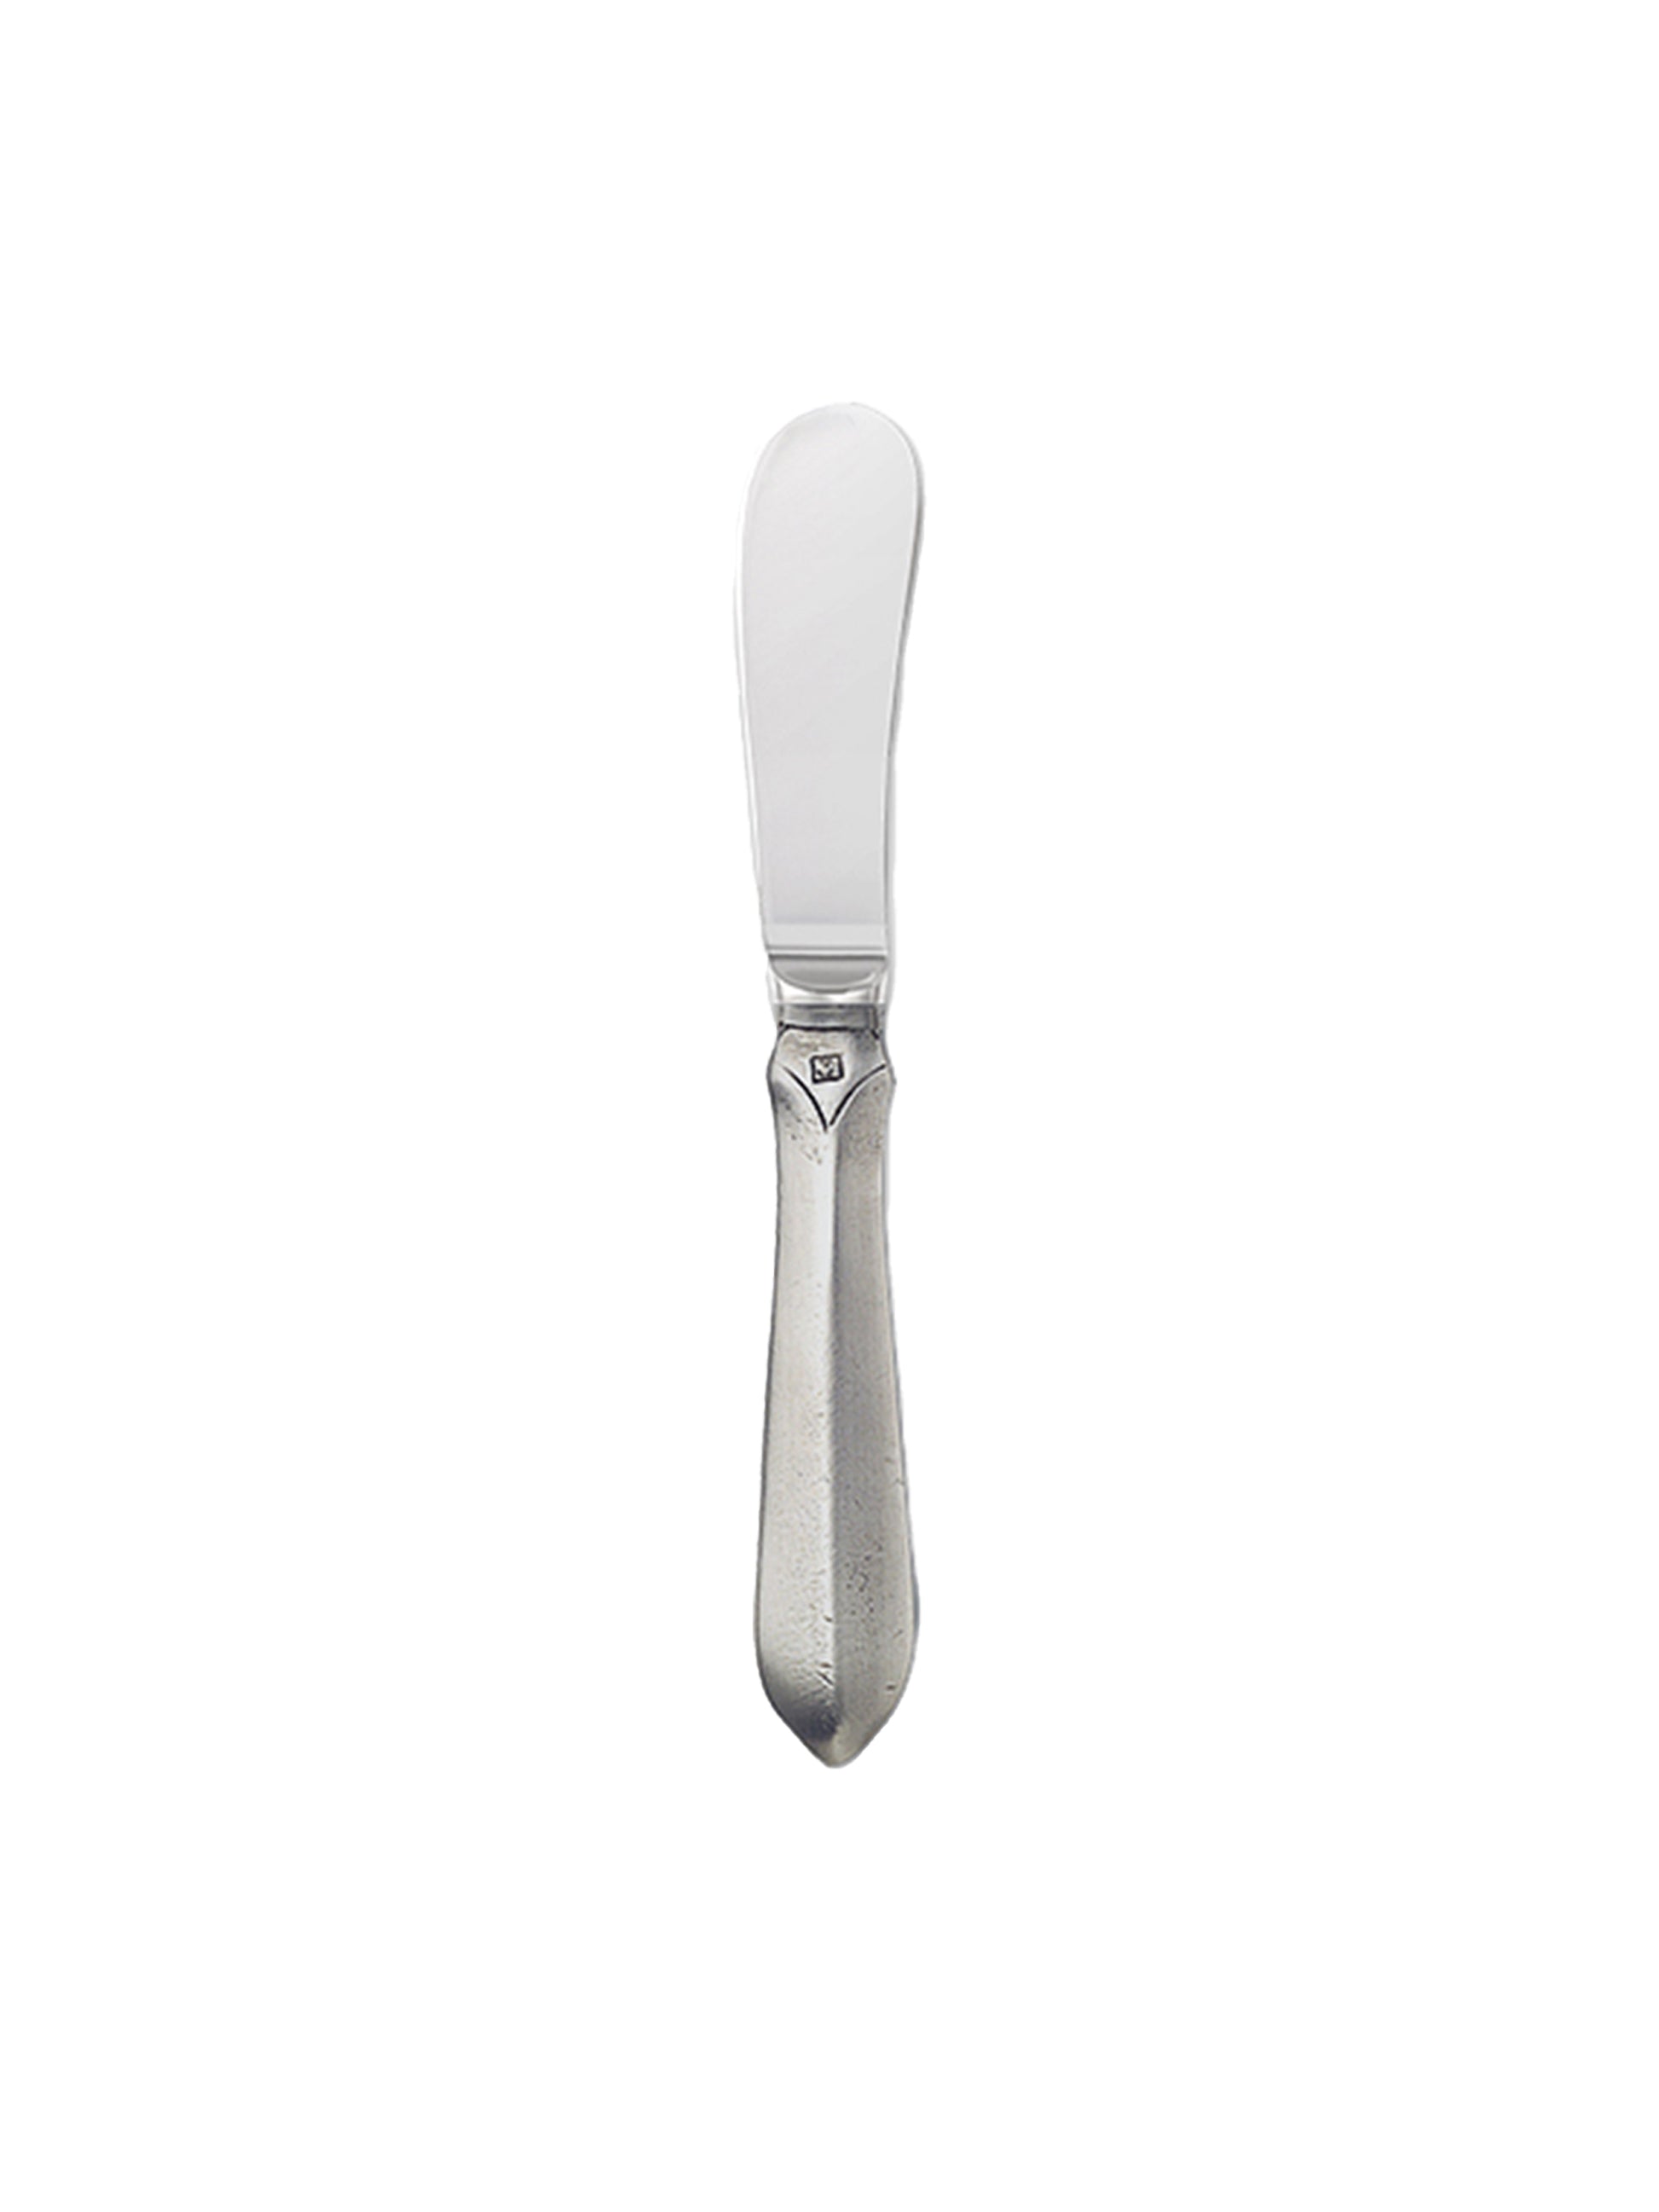 MATCH Pewter Sofia Butter Knife Weston Table